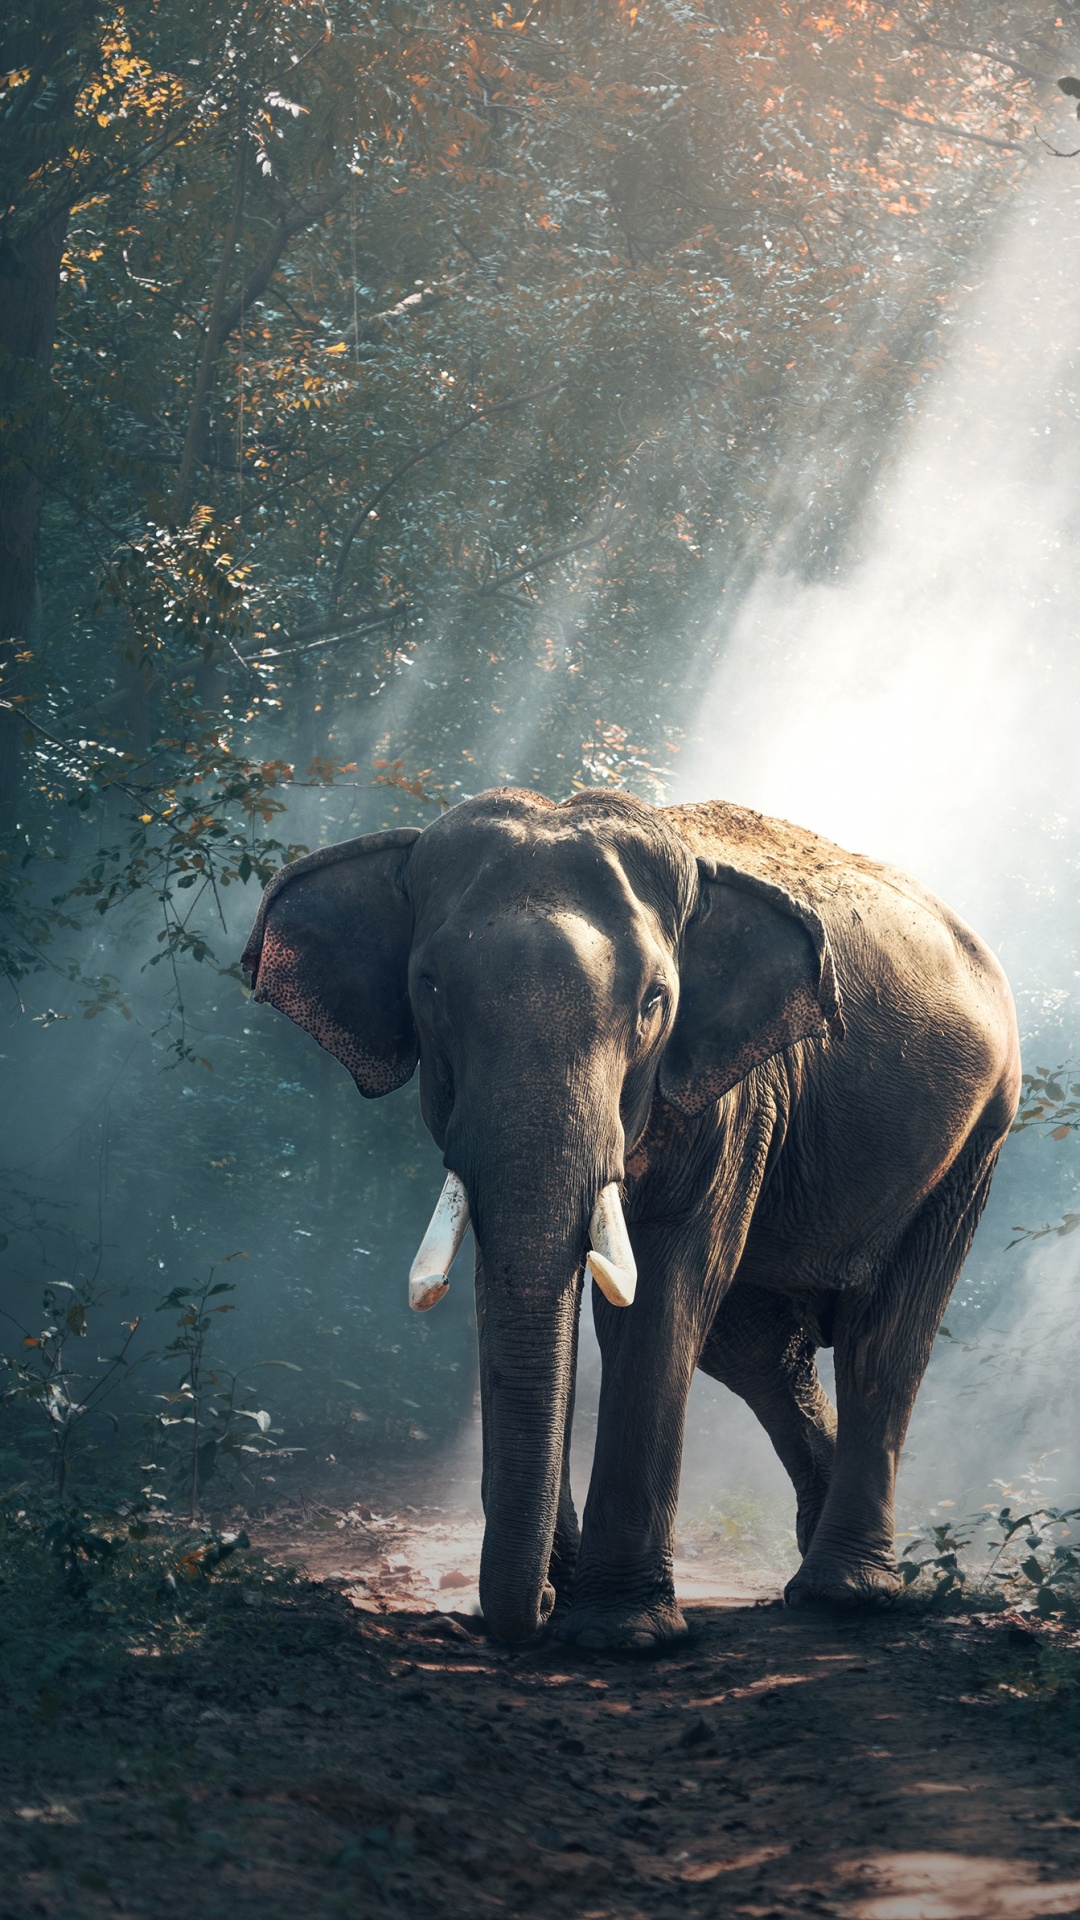 Elephant Walking on The Forest. Wallpaper in 1080x1920 Resolution